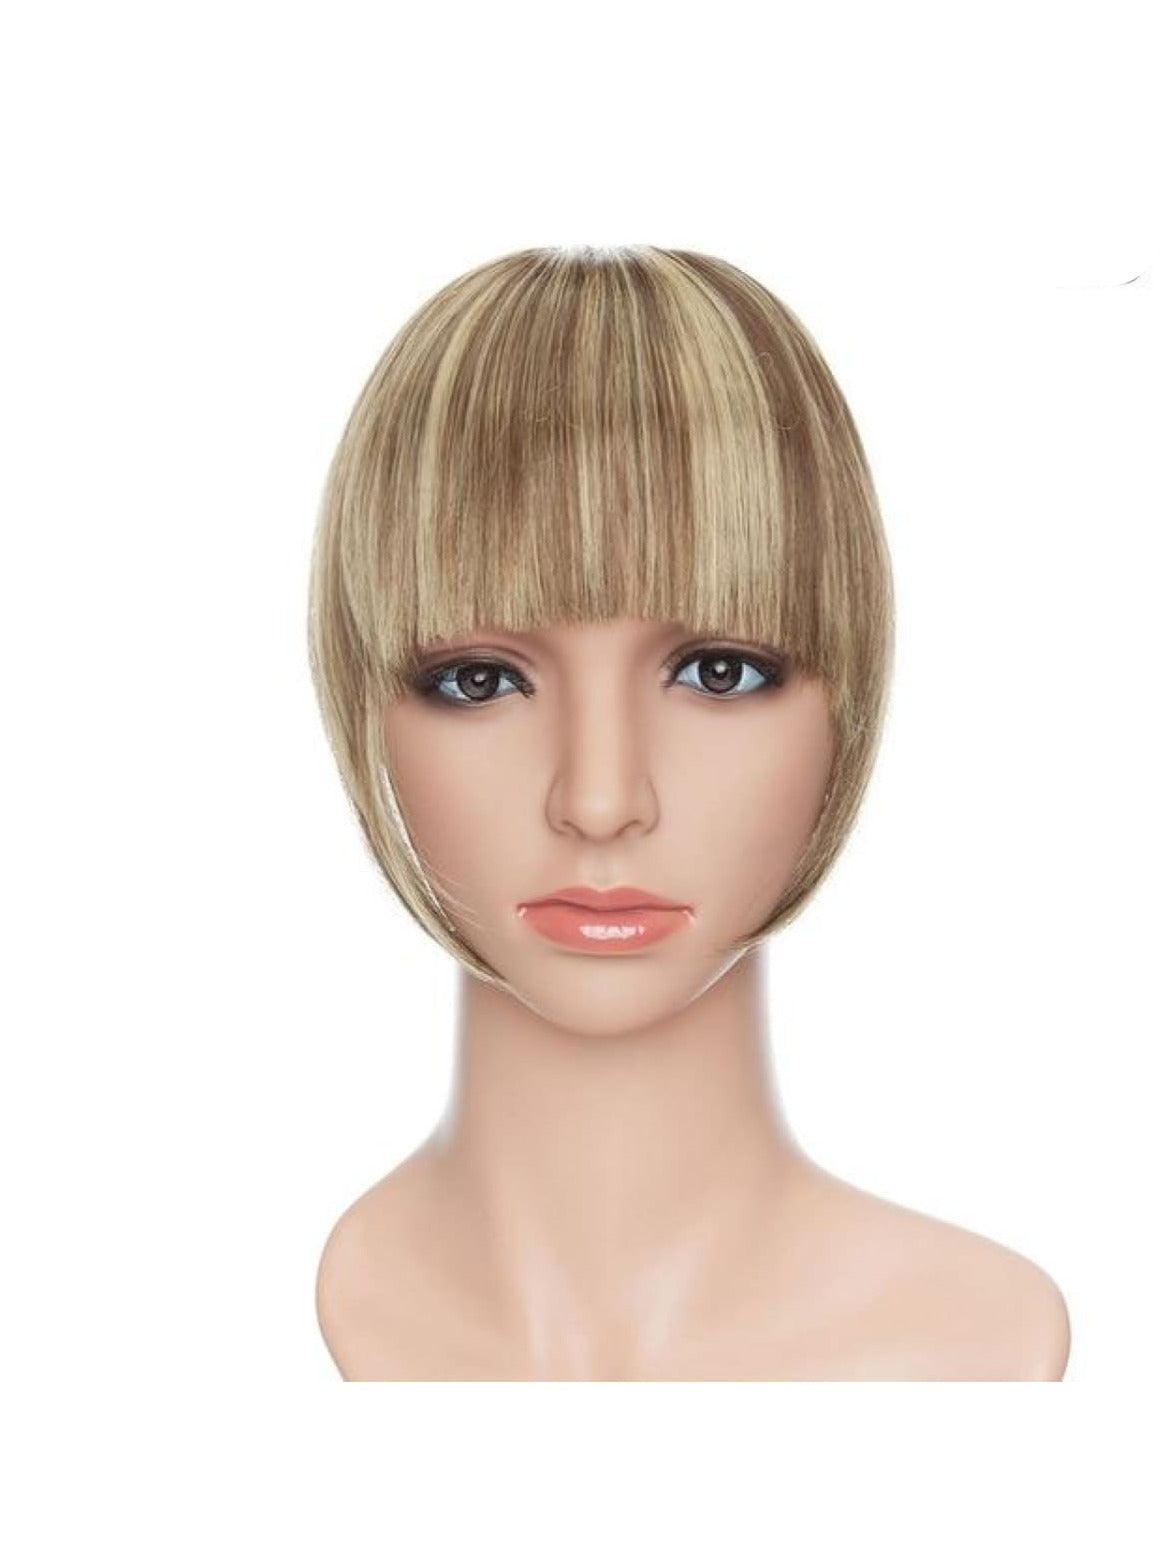 Girls Synthetic Removable Clip-On Bangs - 10-86 / One Size - Girls Halloween Costume